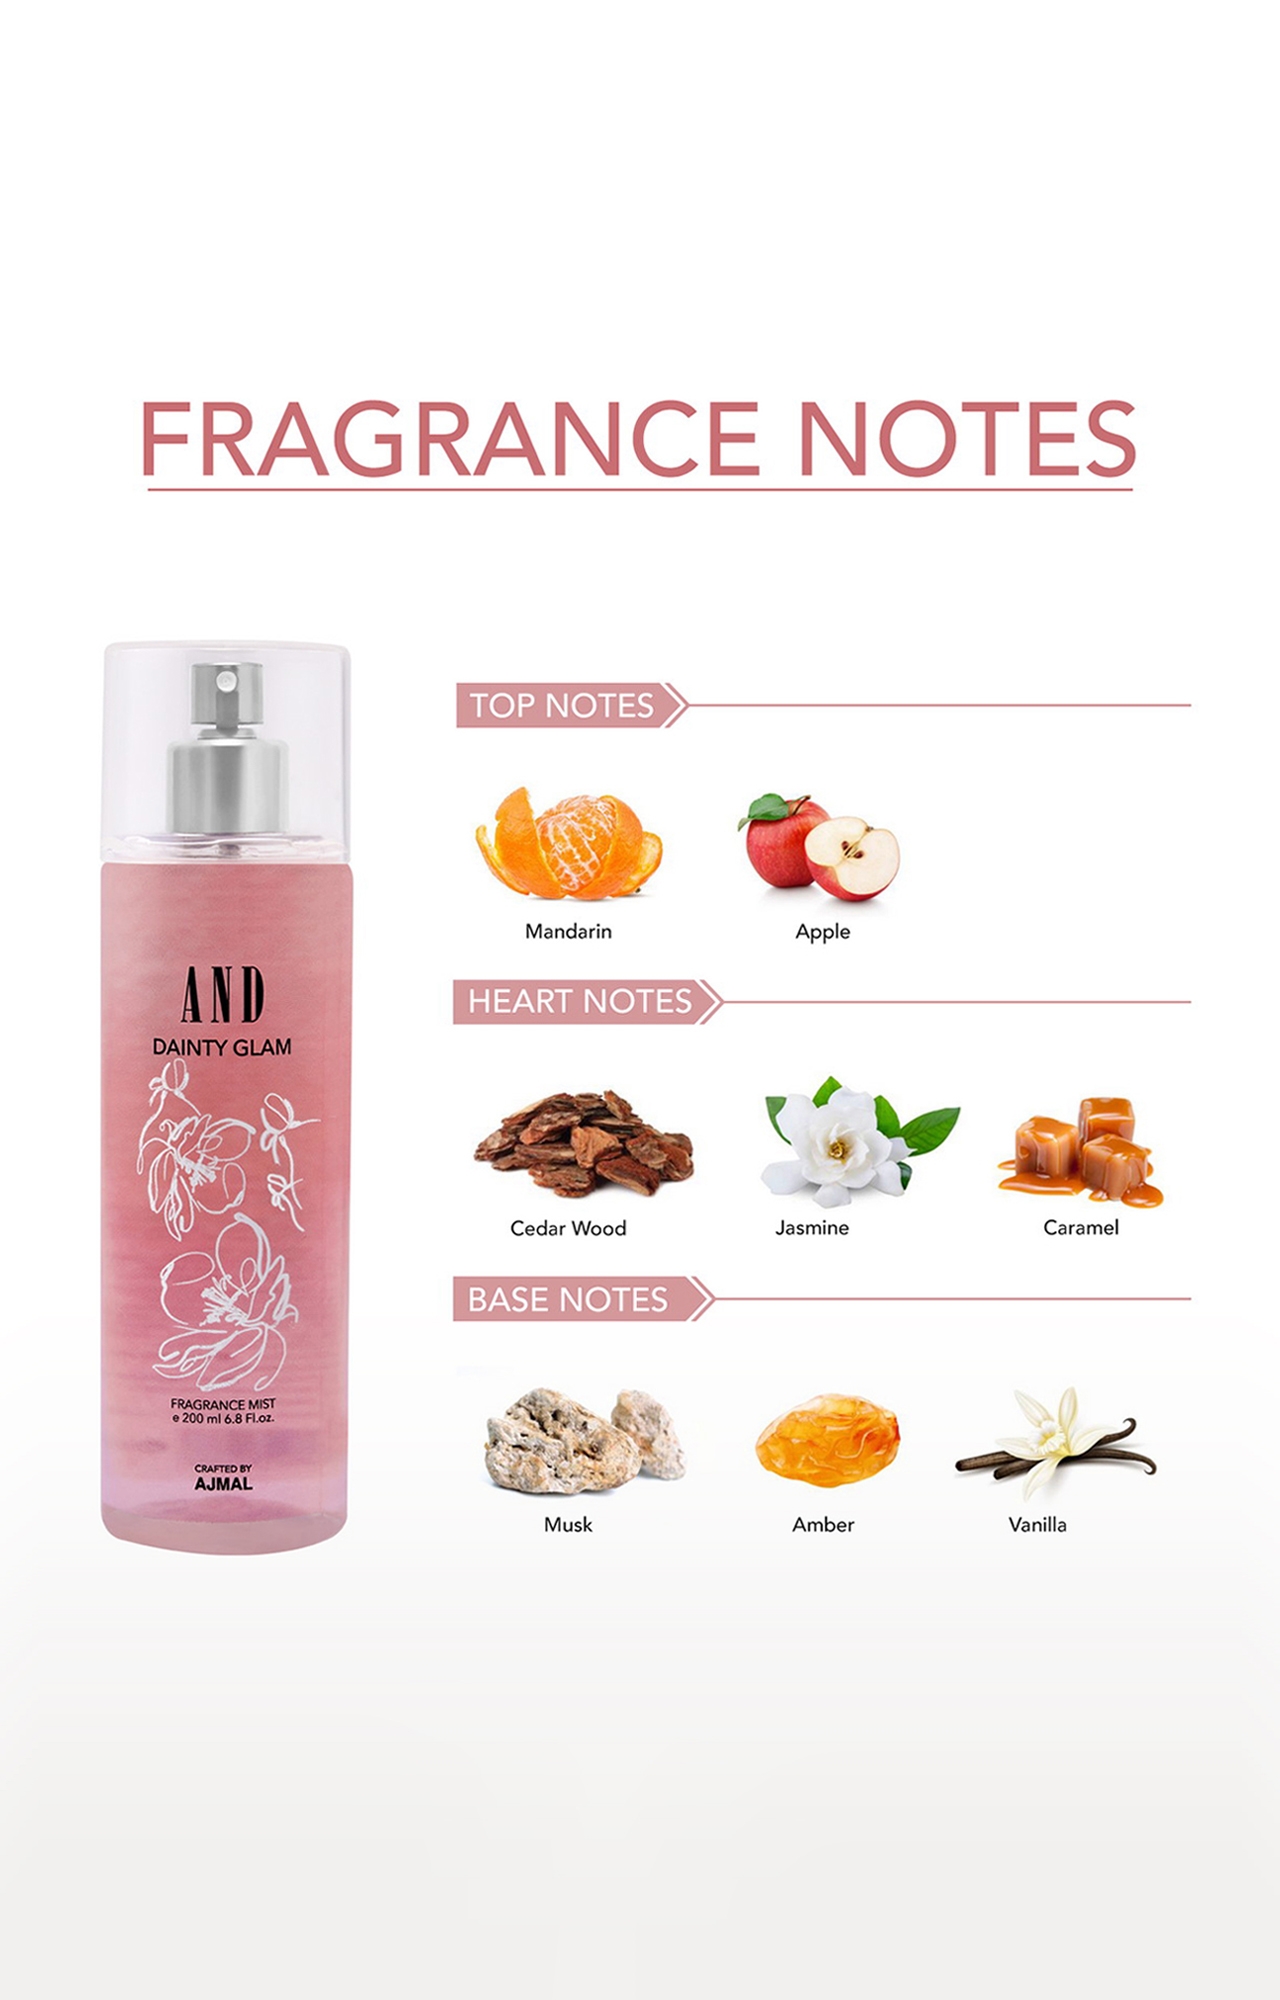 AND Crafted By Ajmal | AND Dainty Glam Body Mist Perfume 200ML Long Lasting Scent Spray Gift For Women Crafted by Ajmal 1